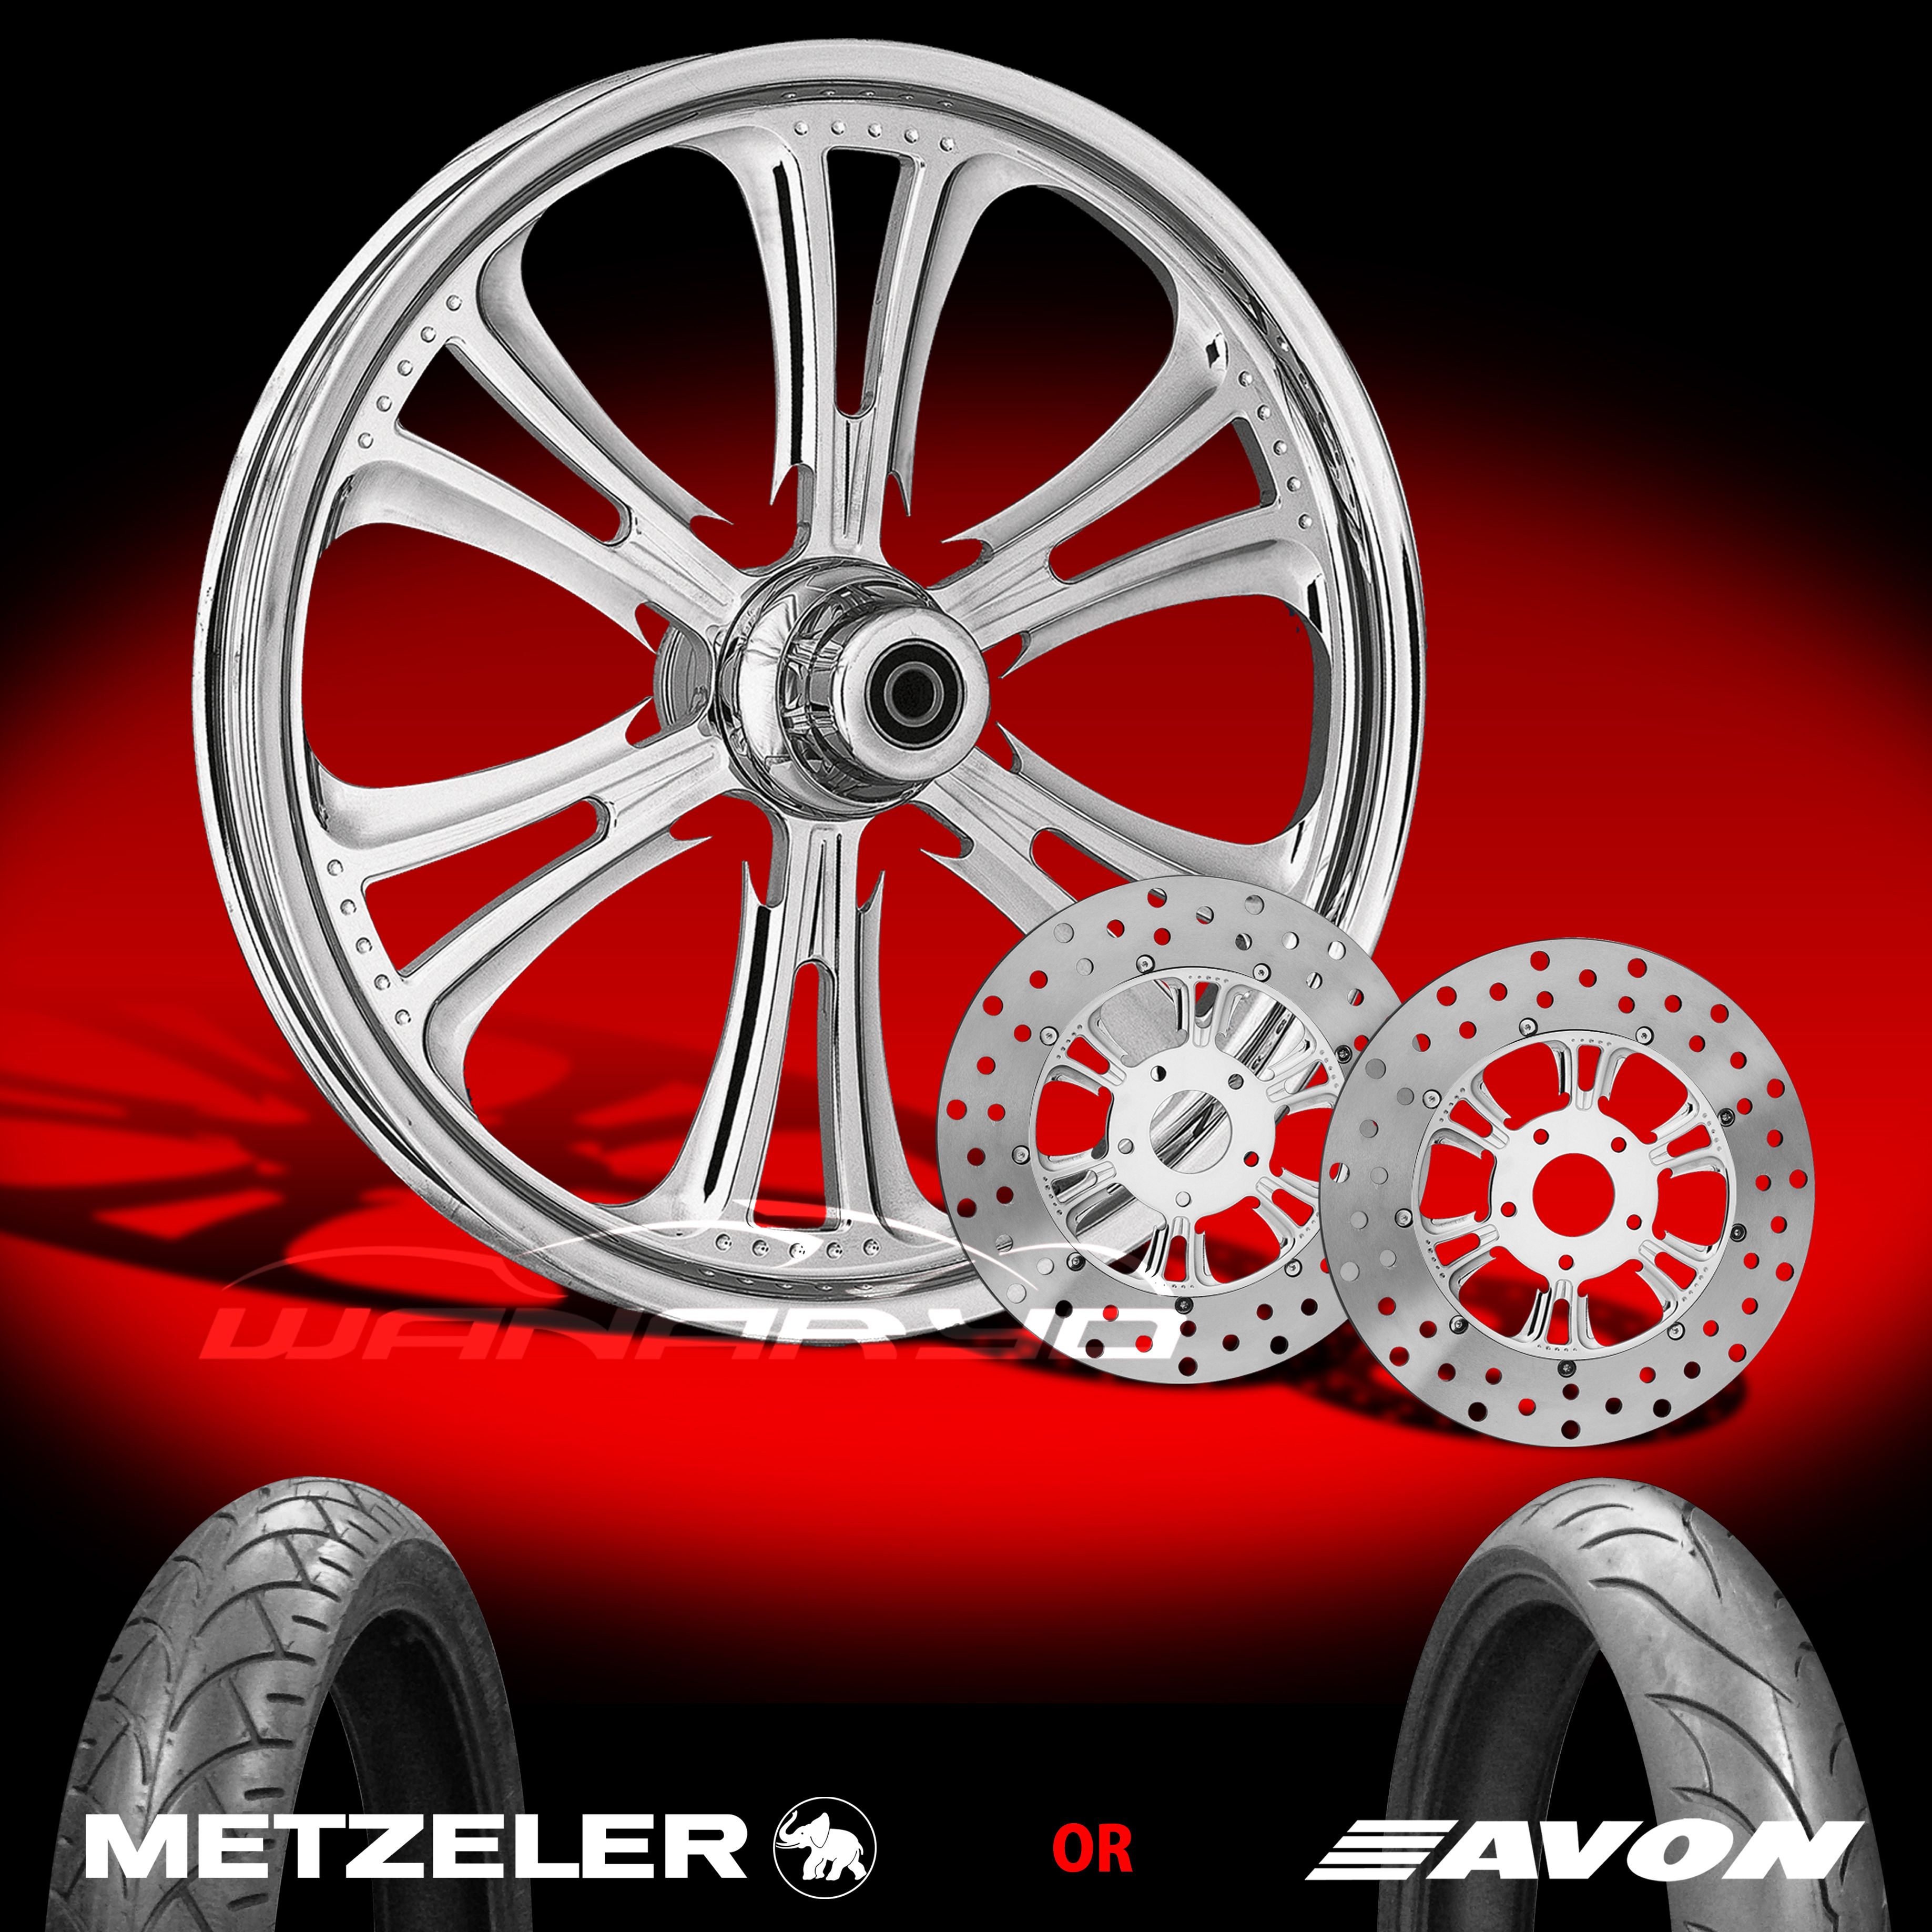 Czar Chrome 21 Front Wheel, Tire & Dual Rotors for 2000 13 Harley